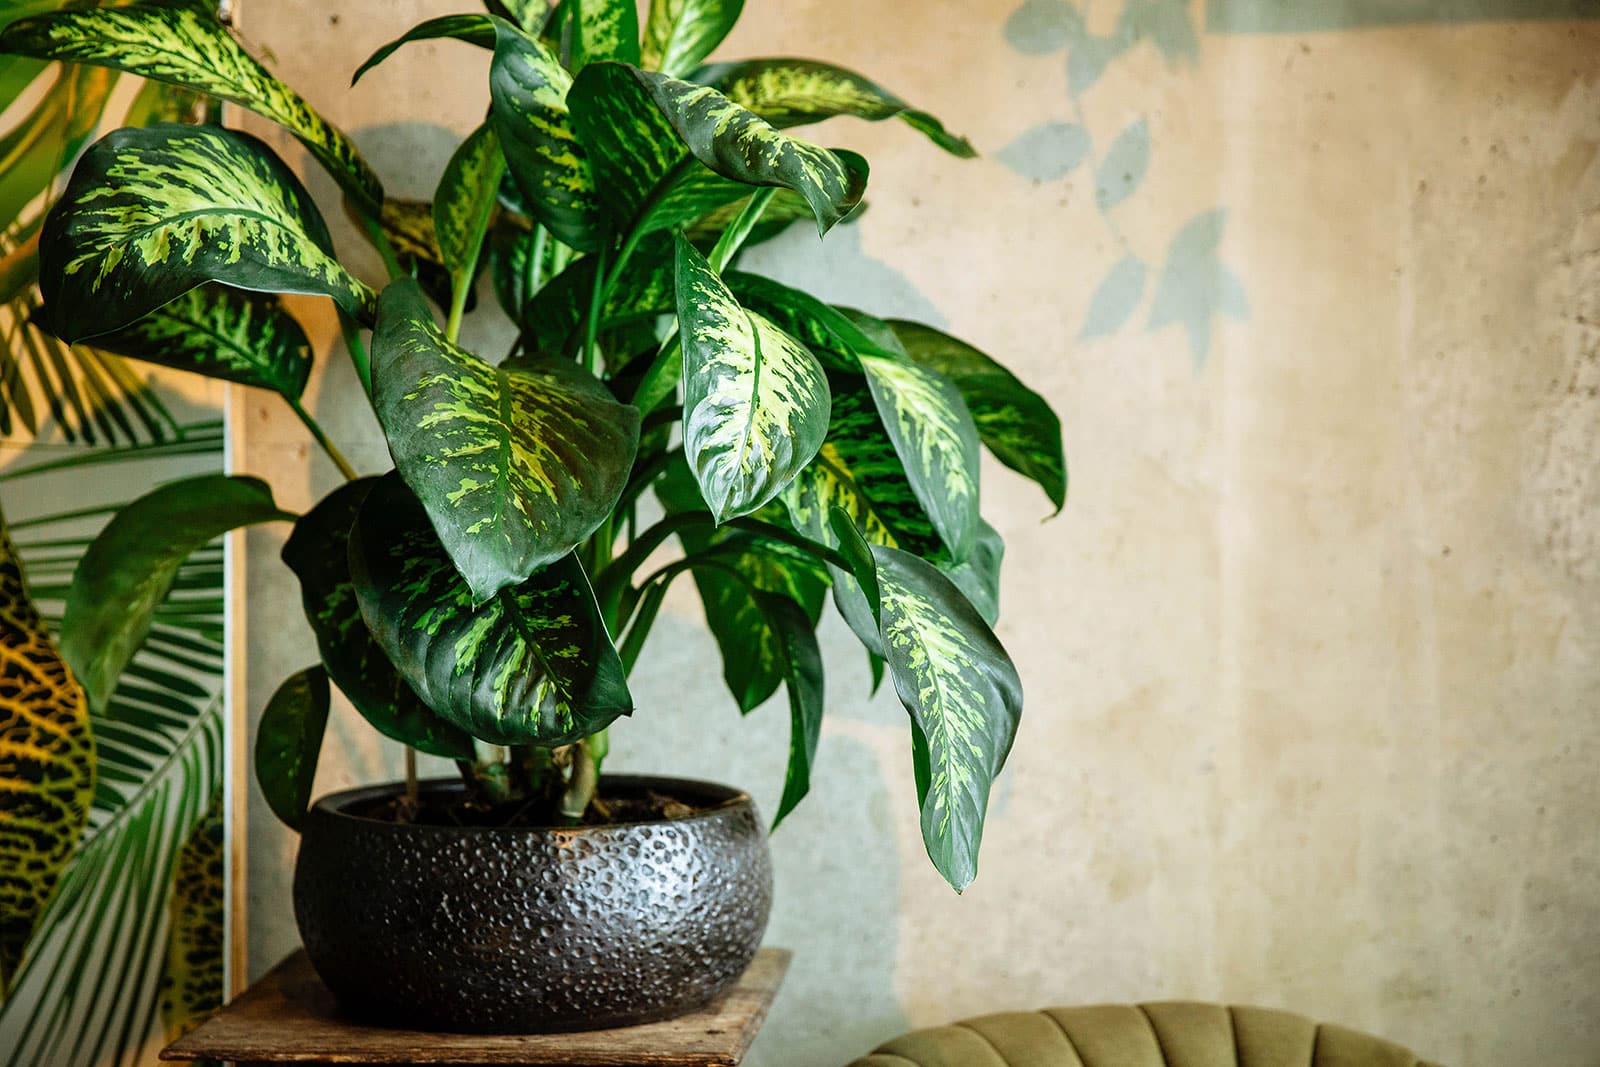 Dazzling Dieffenbachia varieties you'll want to grow at home